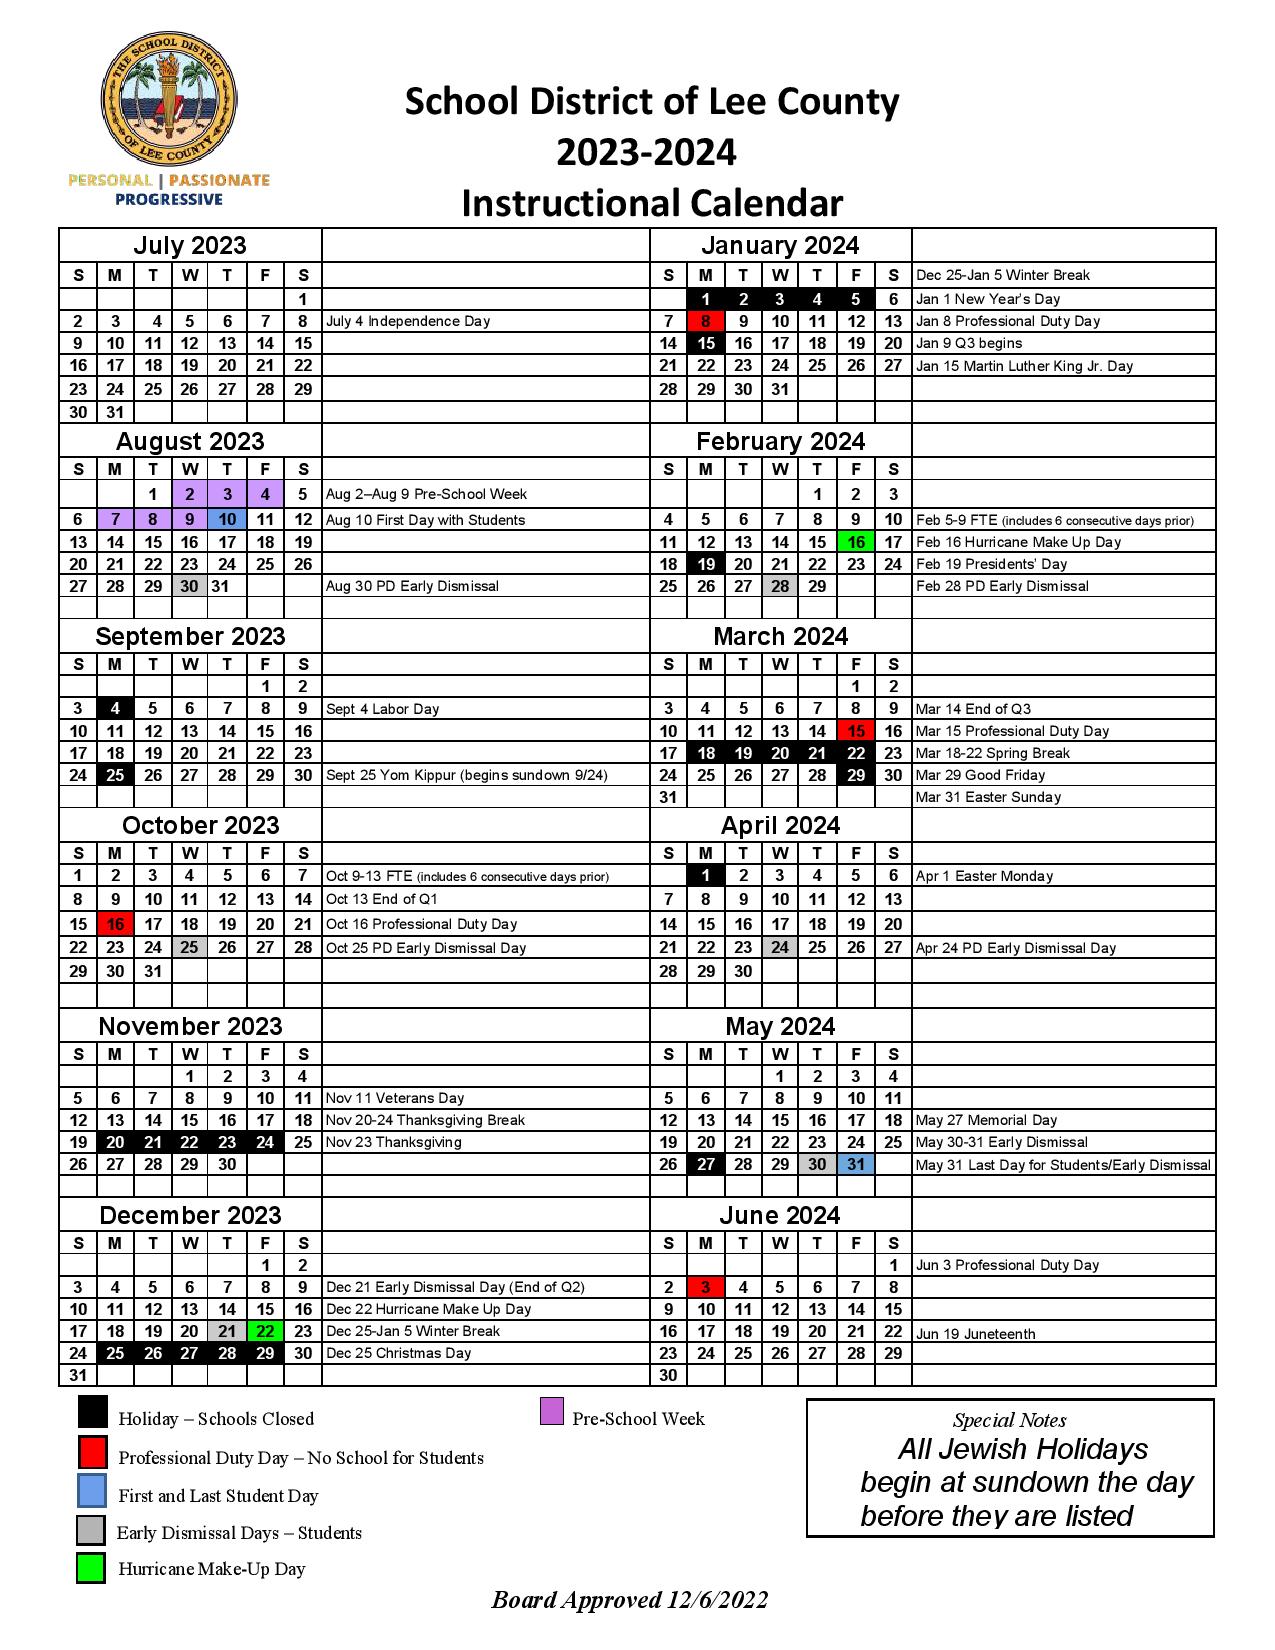 Lee County School District Calendar 2023 2024 with Holidays